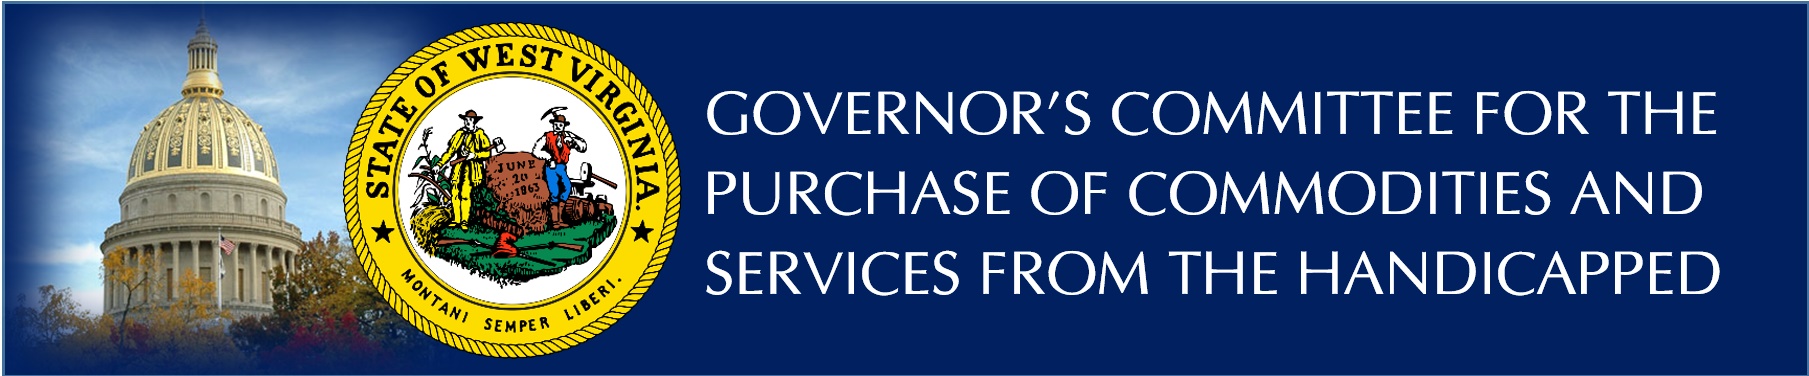 Governor's Committee for the Purchase of Commodities and Services from the Handicapped